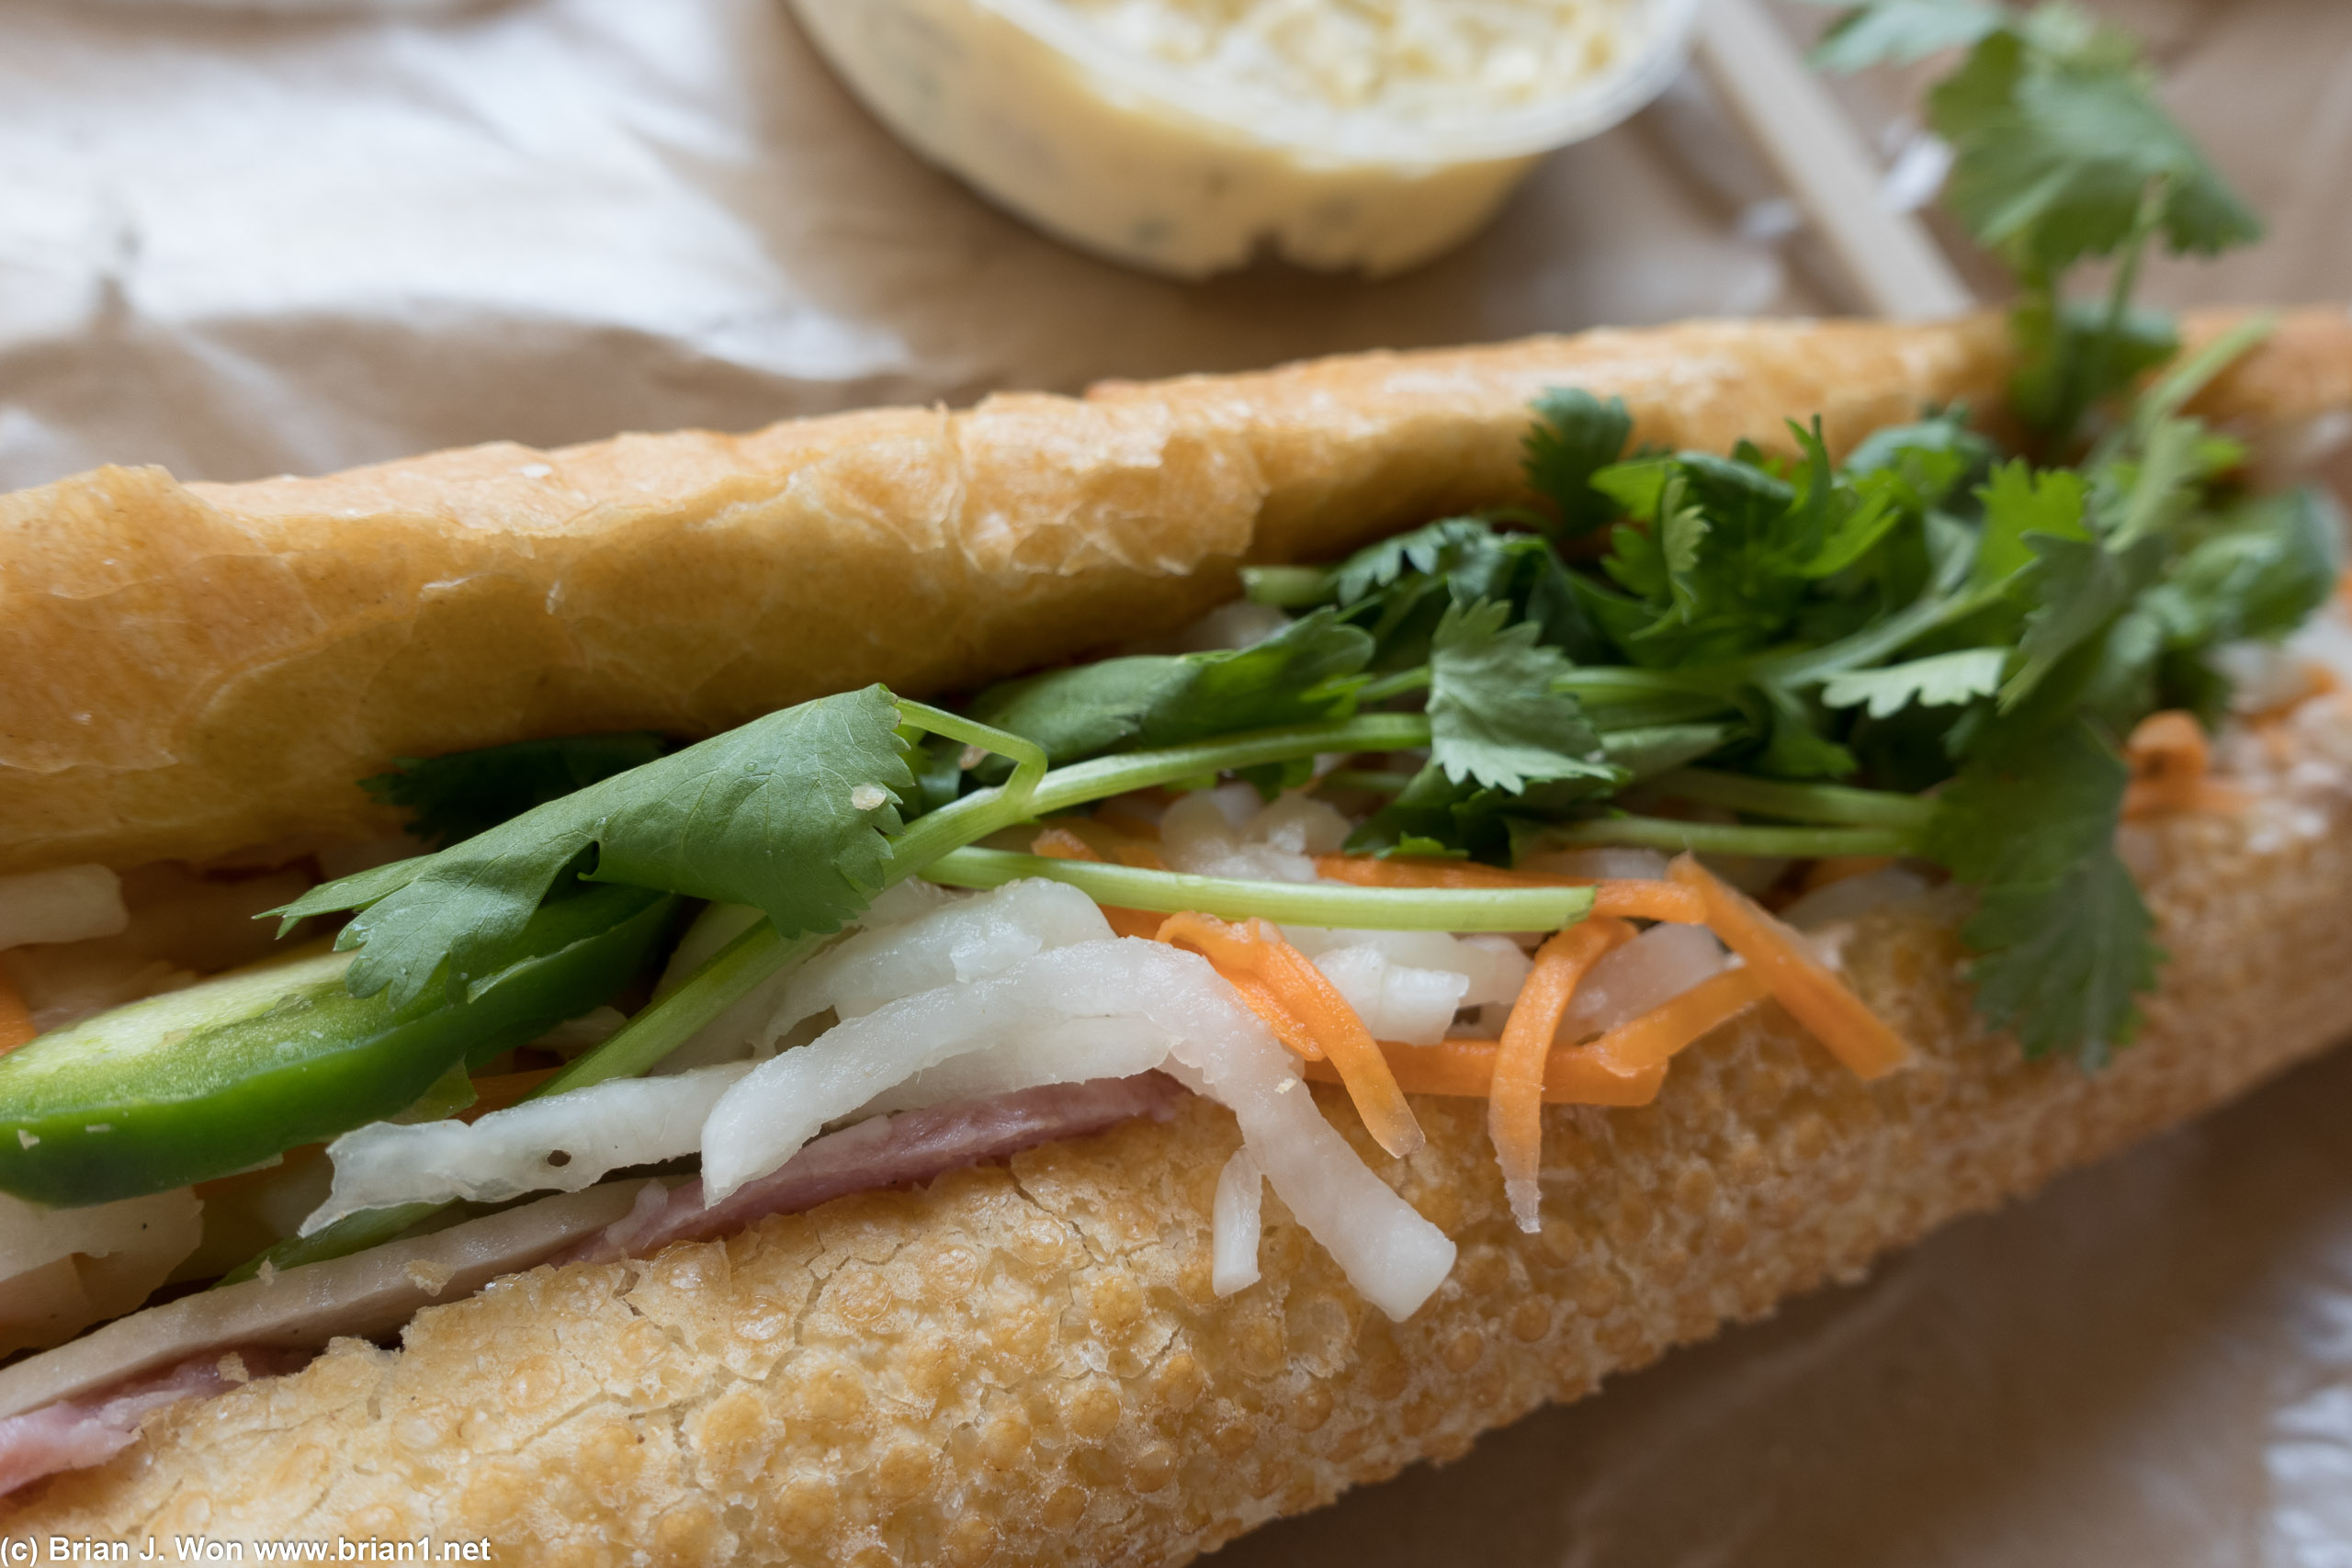 Banh mi looks about right.